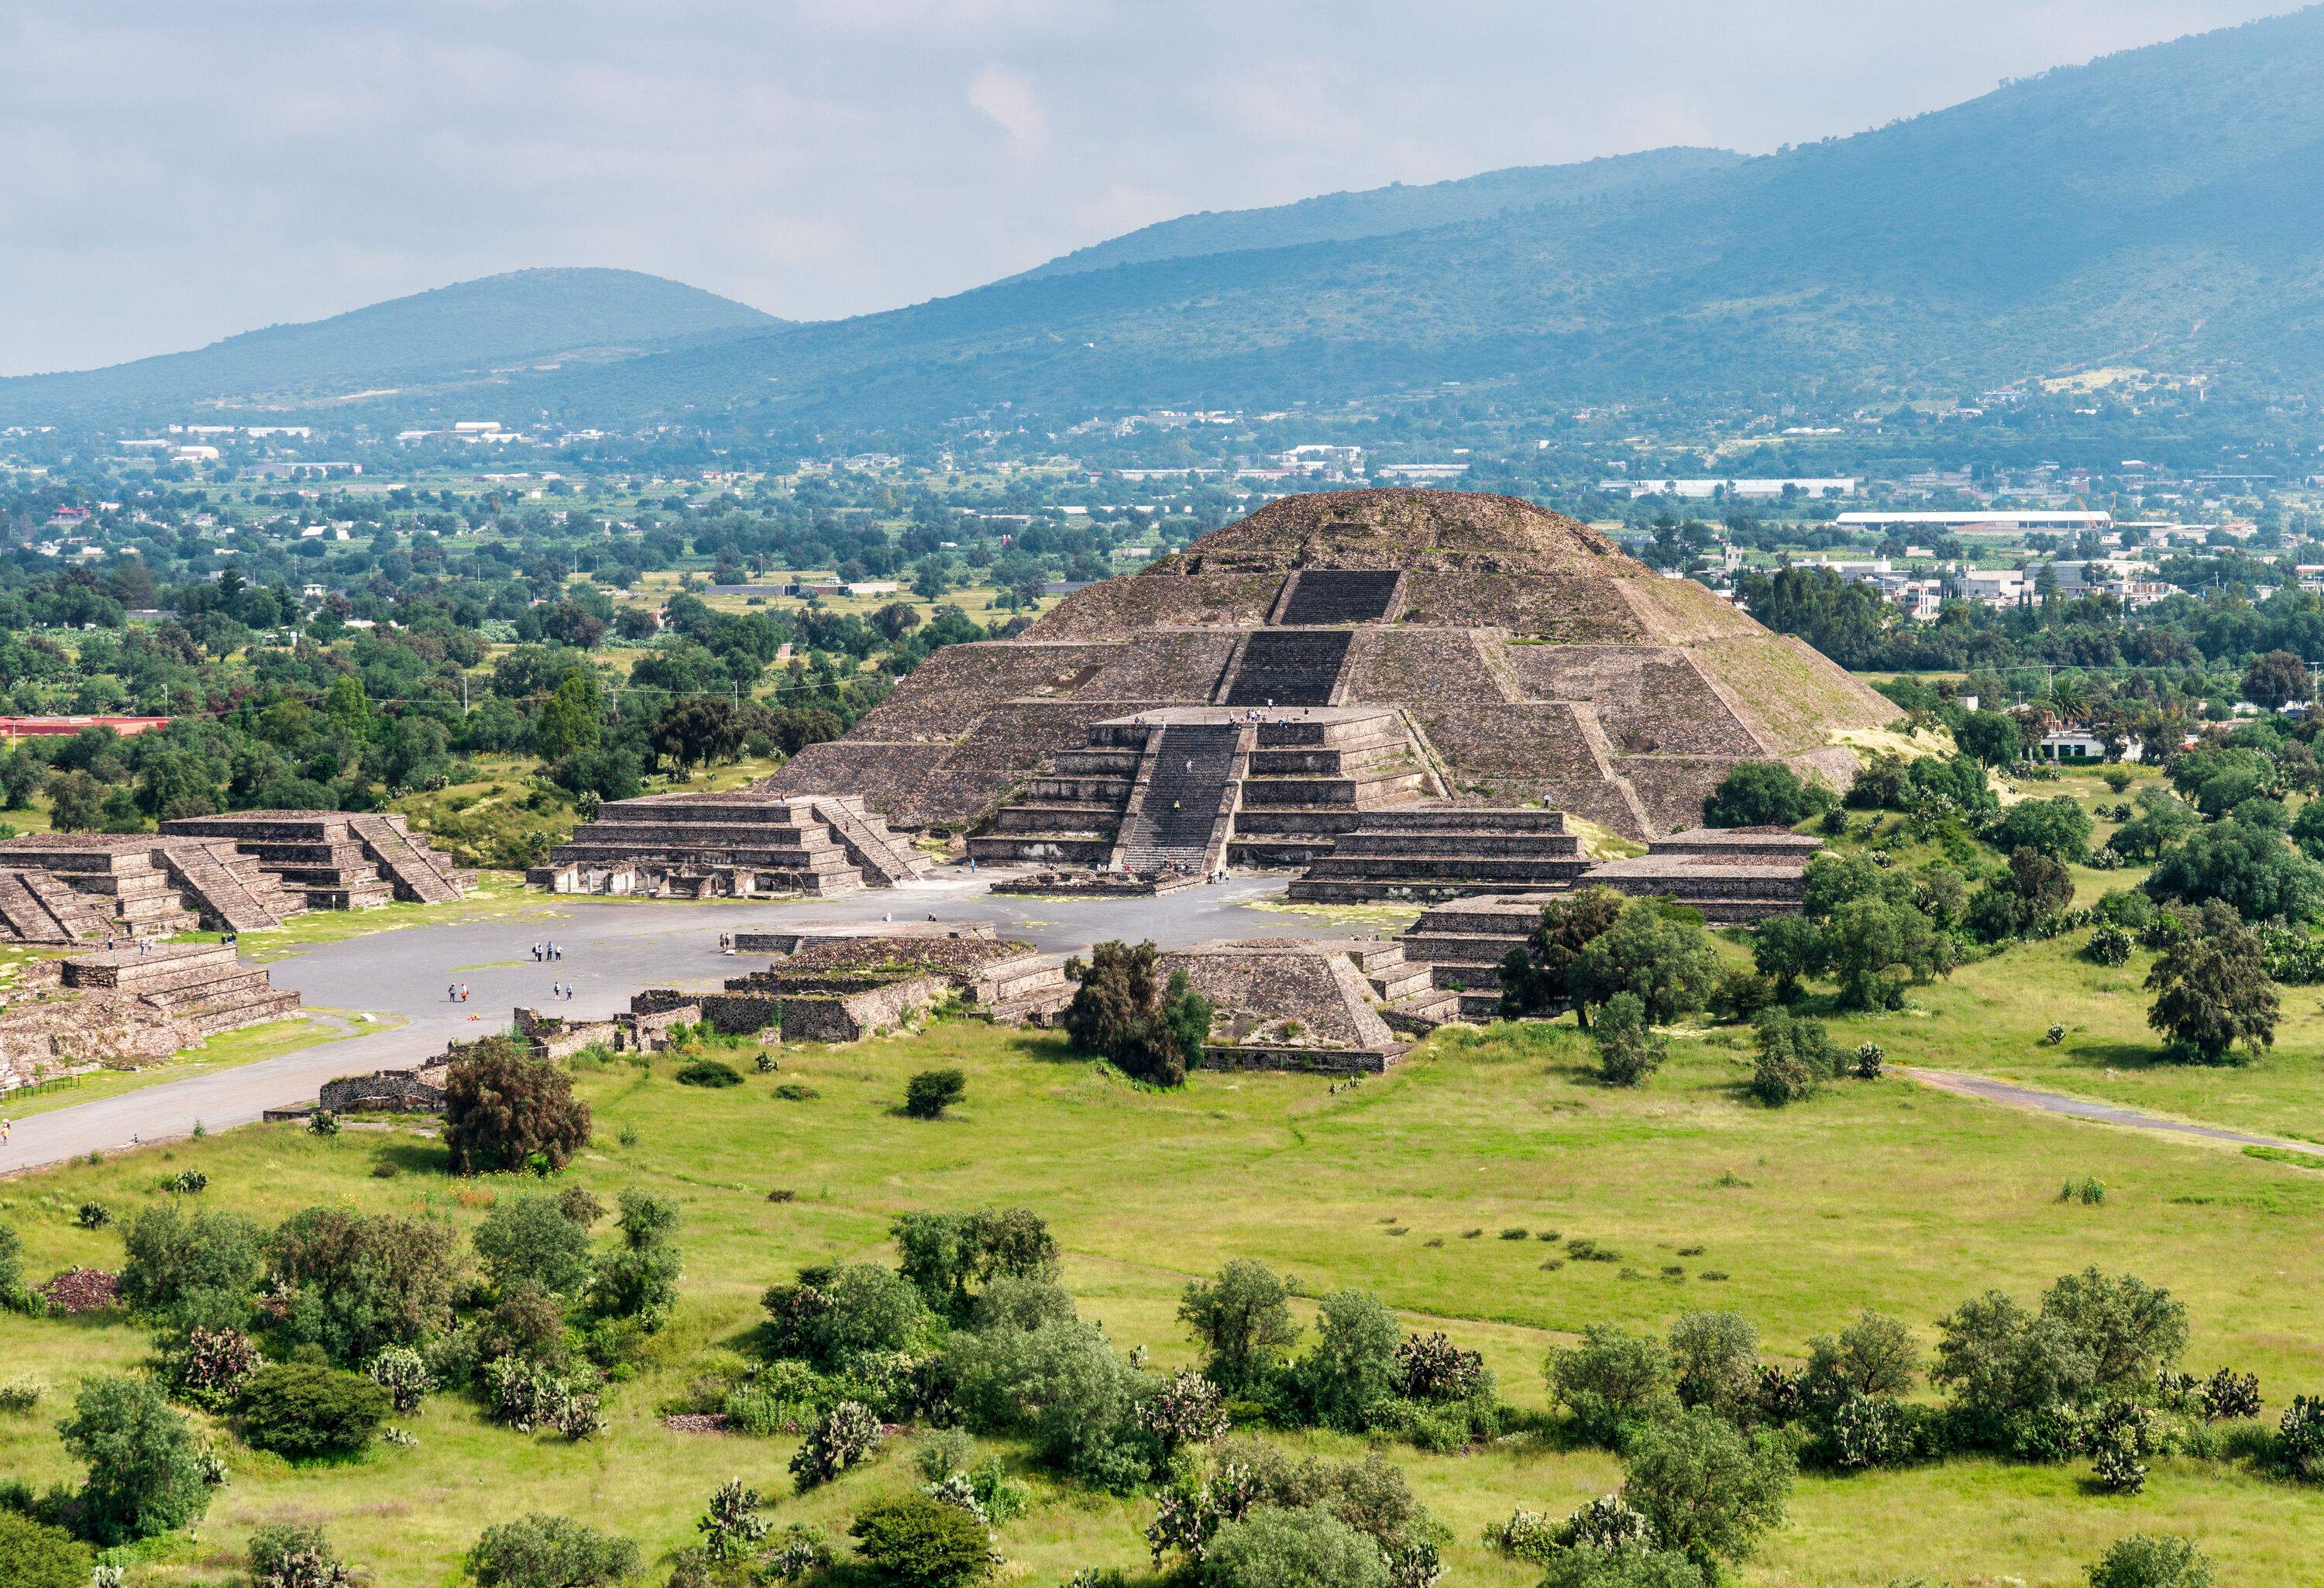 The remarkable architecture of the ancient Teotihuacan pyramids and ruins, featuring intricate carvings and detailed stone masonry.